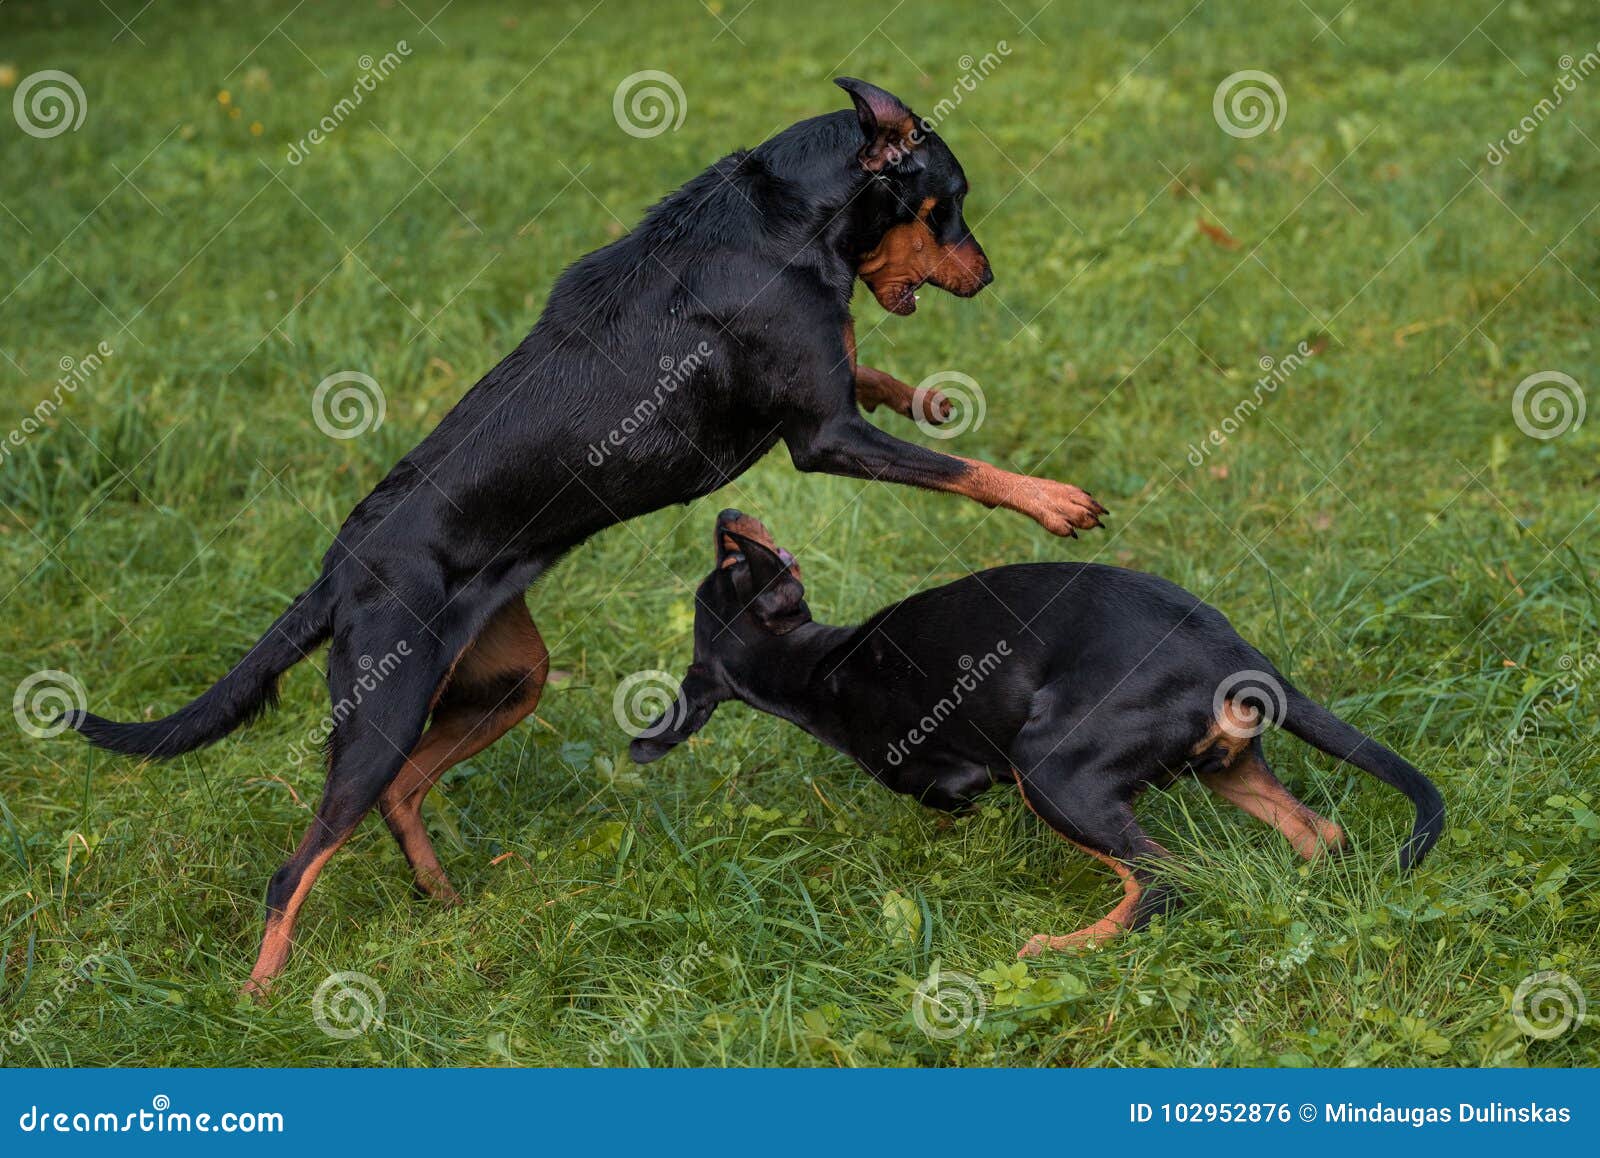 Lithuanian Hound Dogs Playing On The Grass Stock Photo Image Of Animal Hunter 102952876